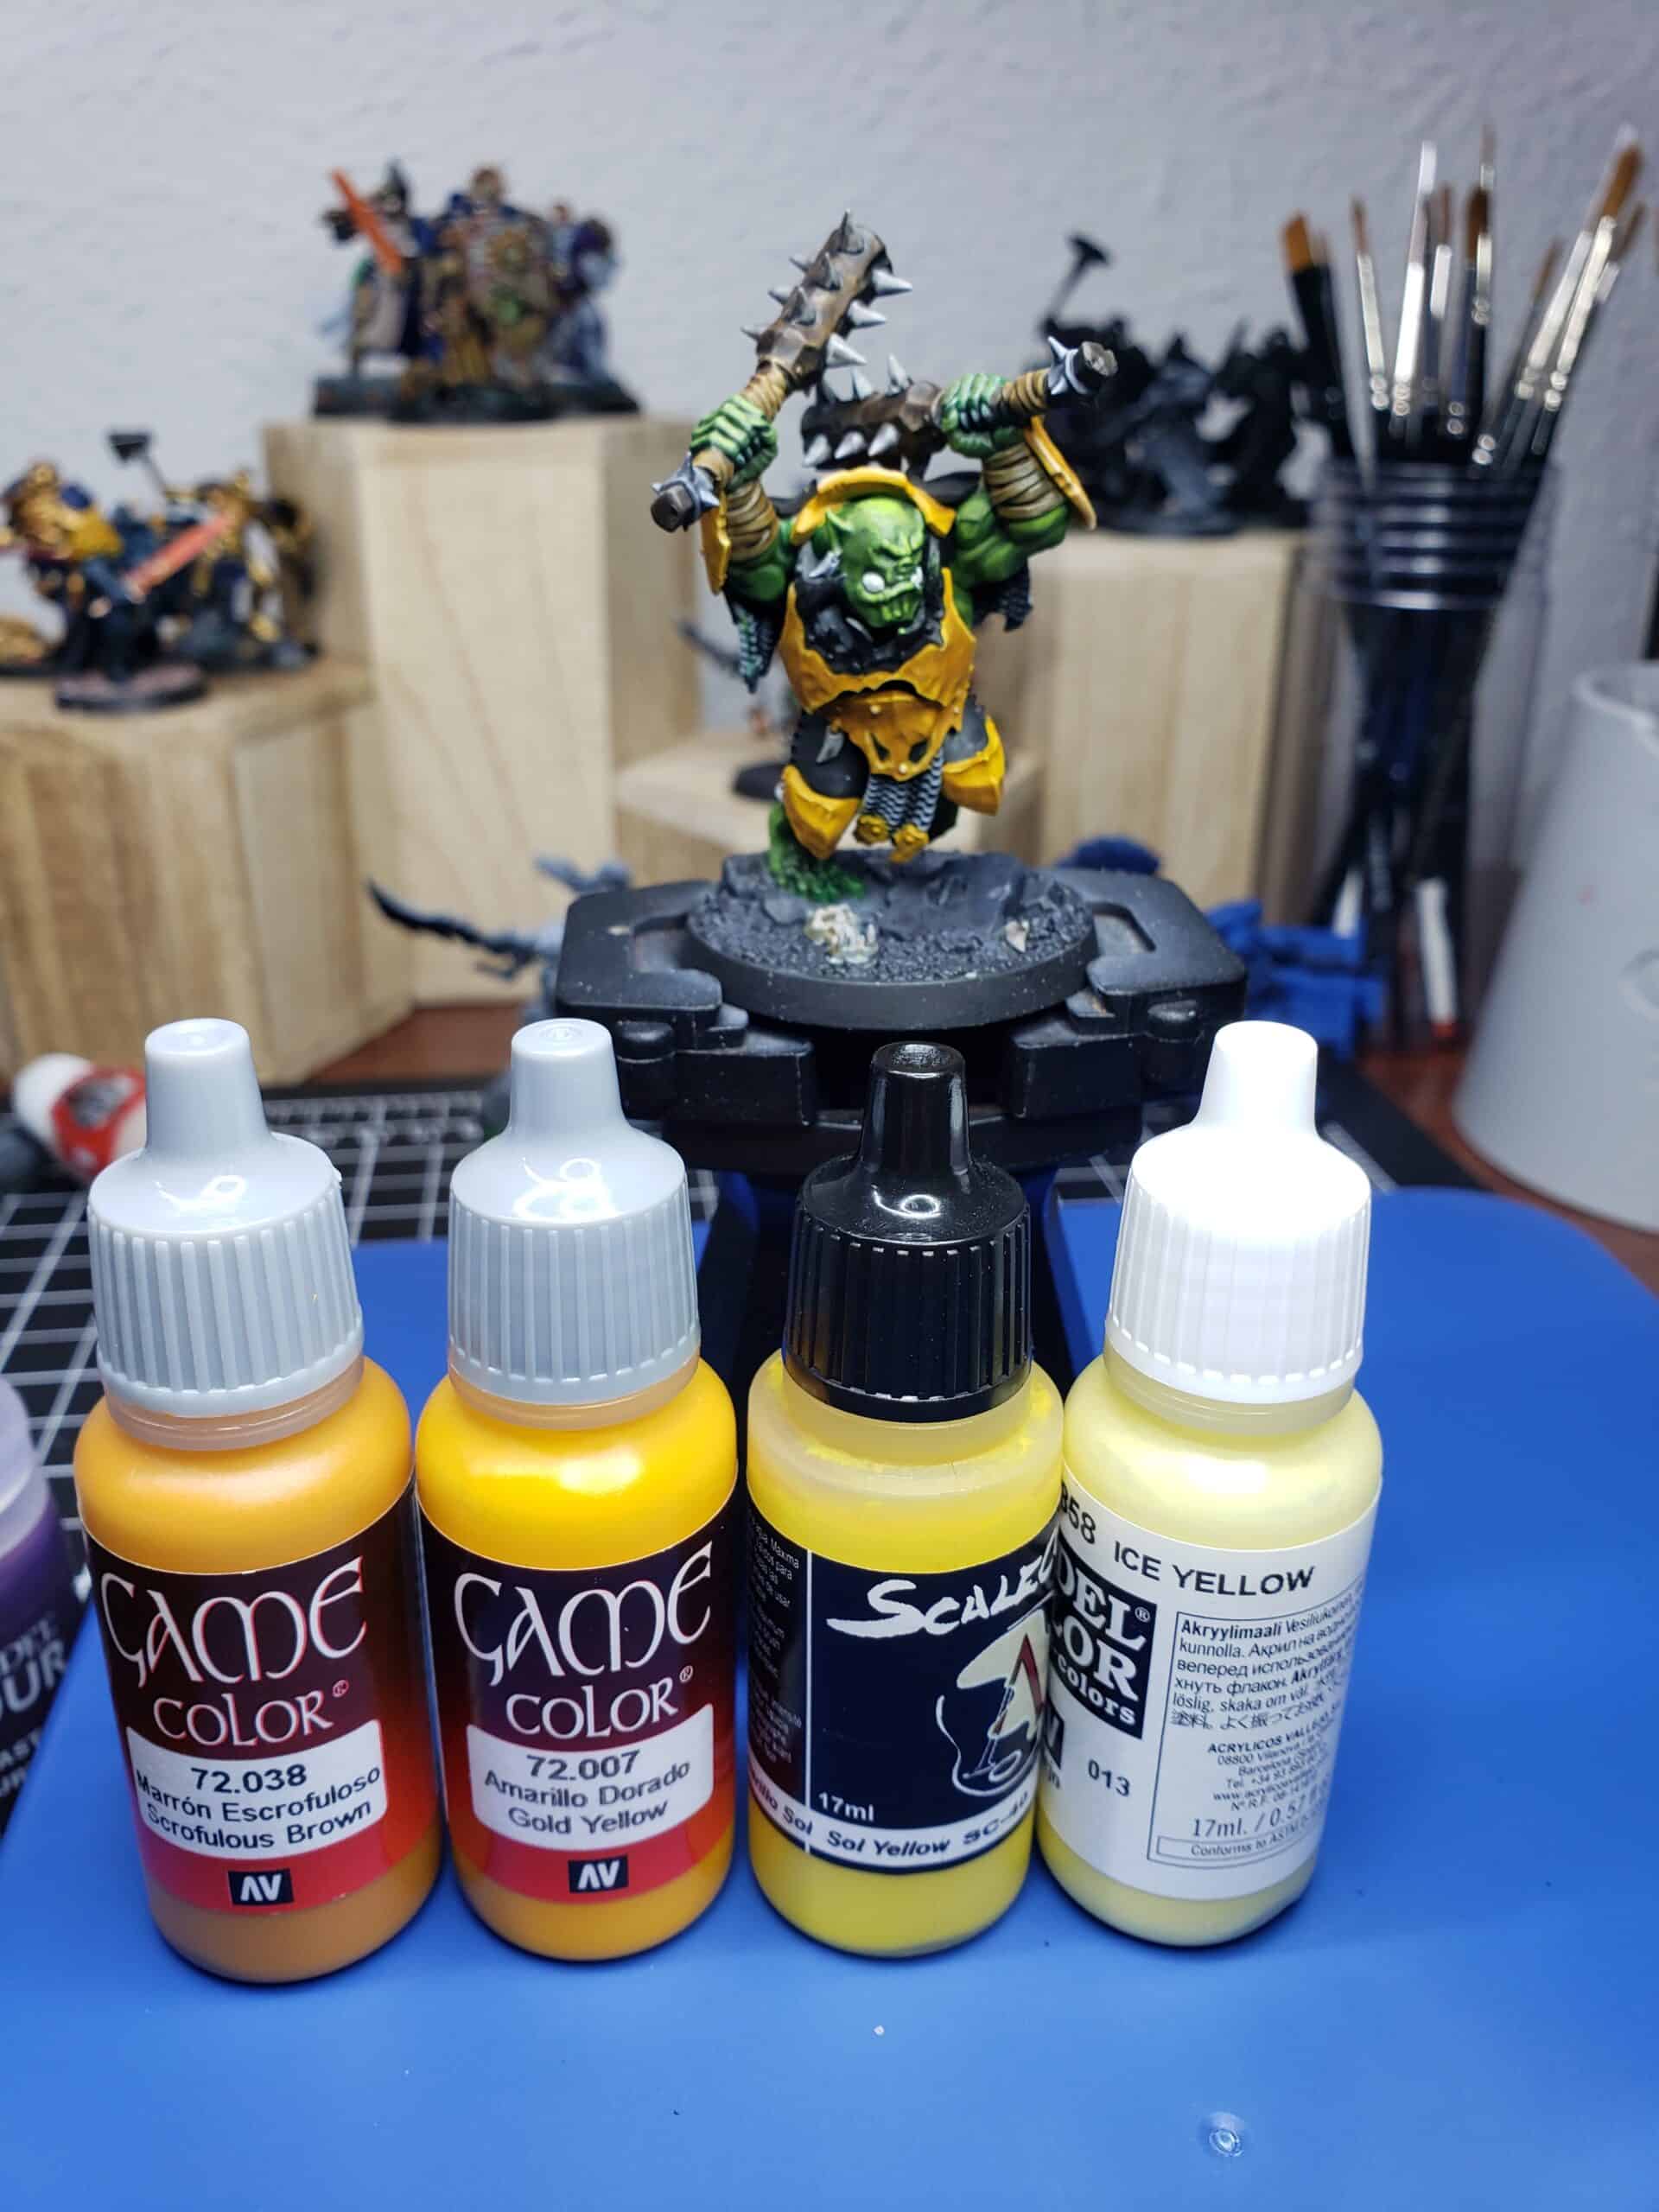 Best Airbrush for Miniatures and Models - Beginner's Guide